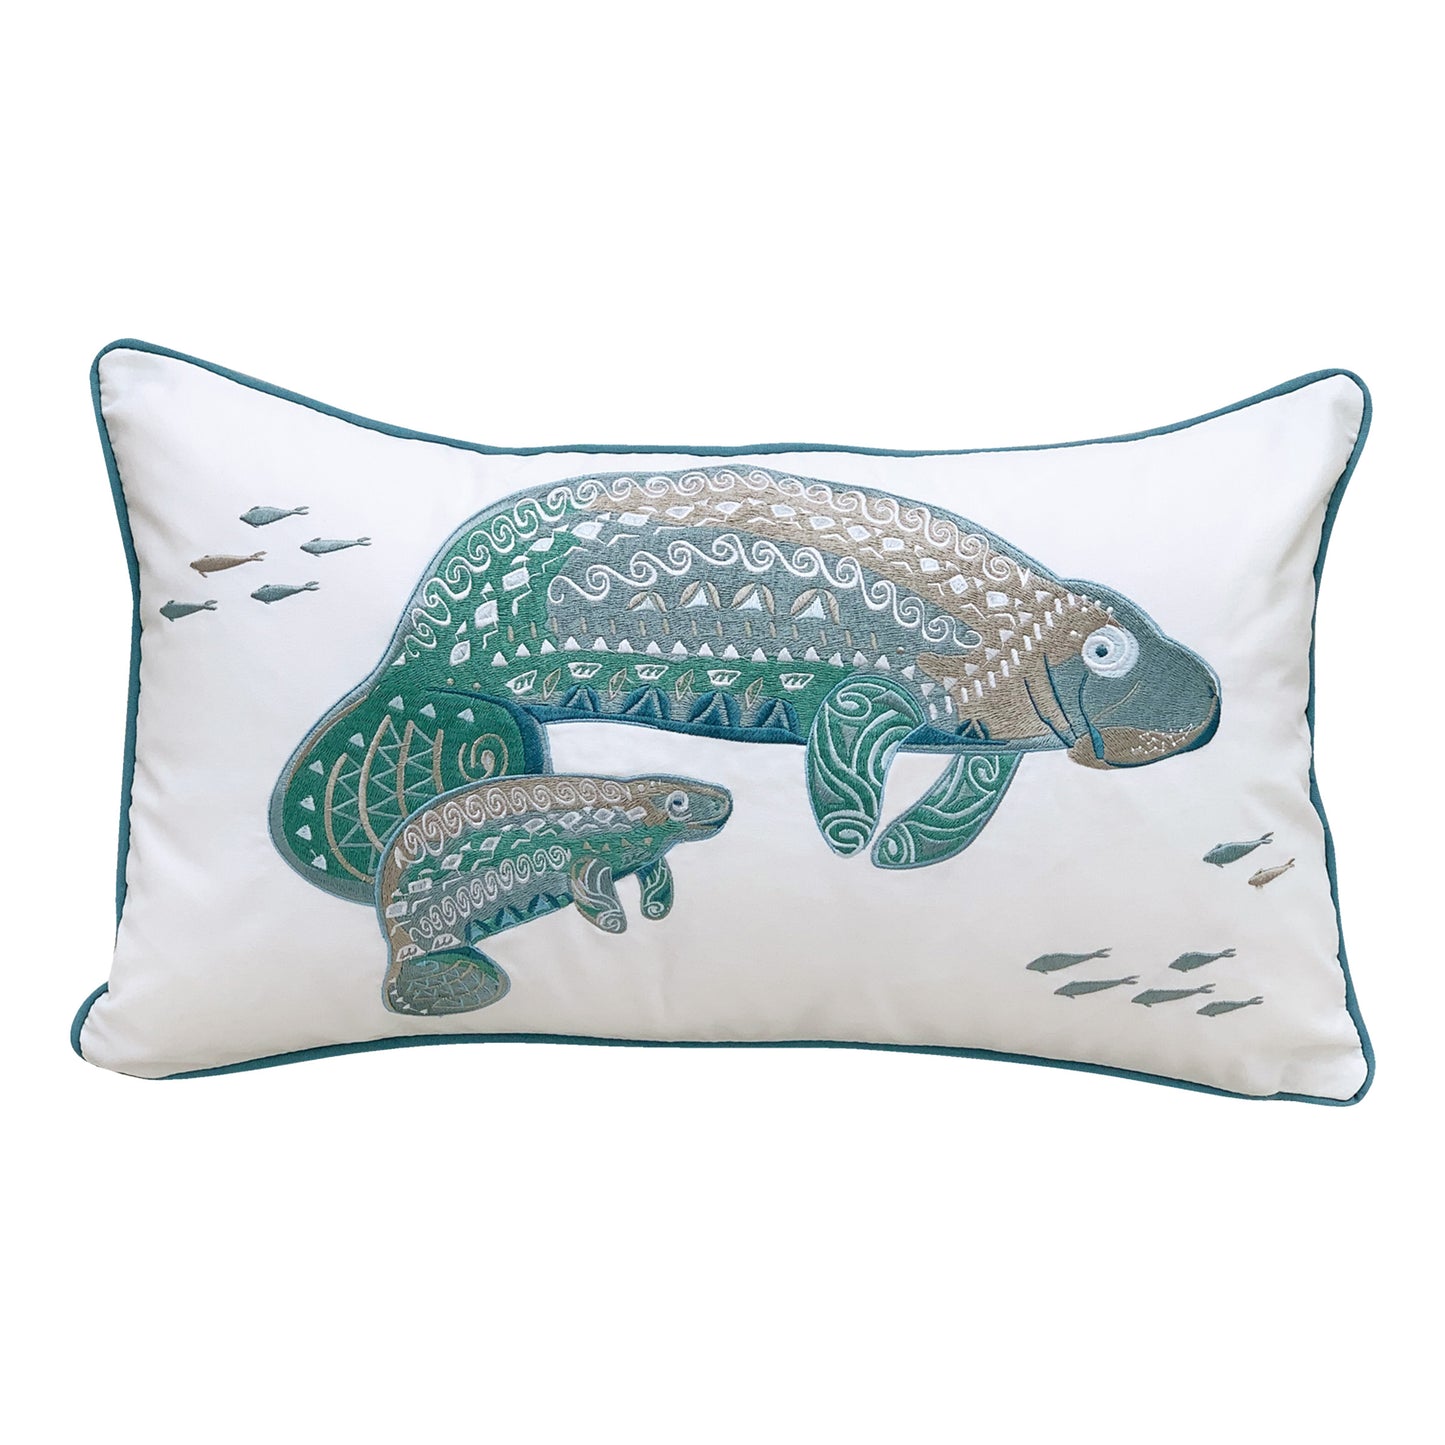 A mother and baby manatee featuring tribal designs is embroidered on a white background. Pillow is finished with blue piped edging.